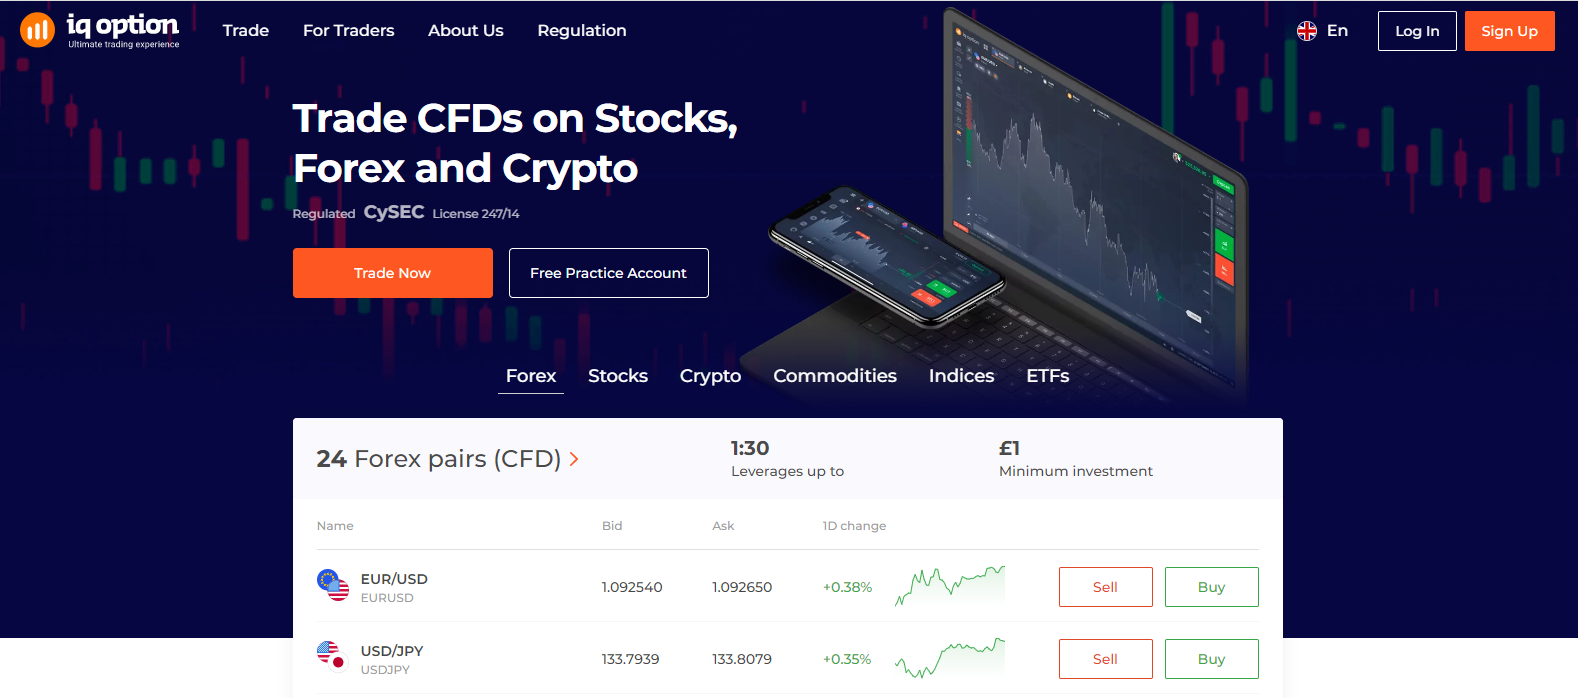 The official website of the online broker IQ Option